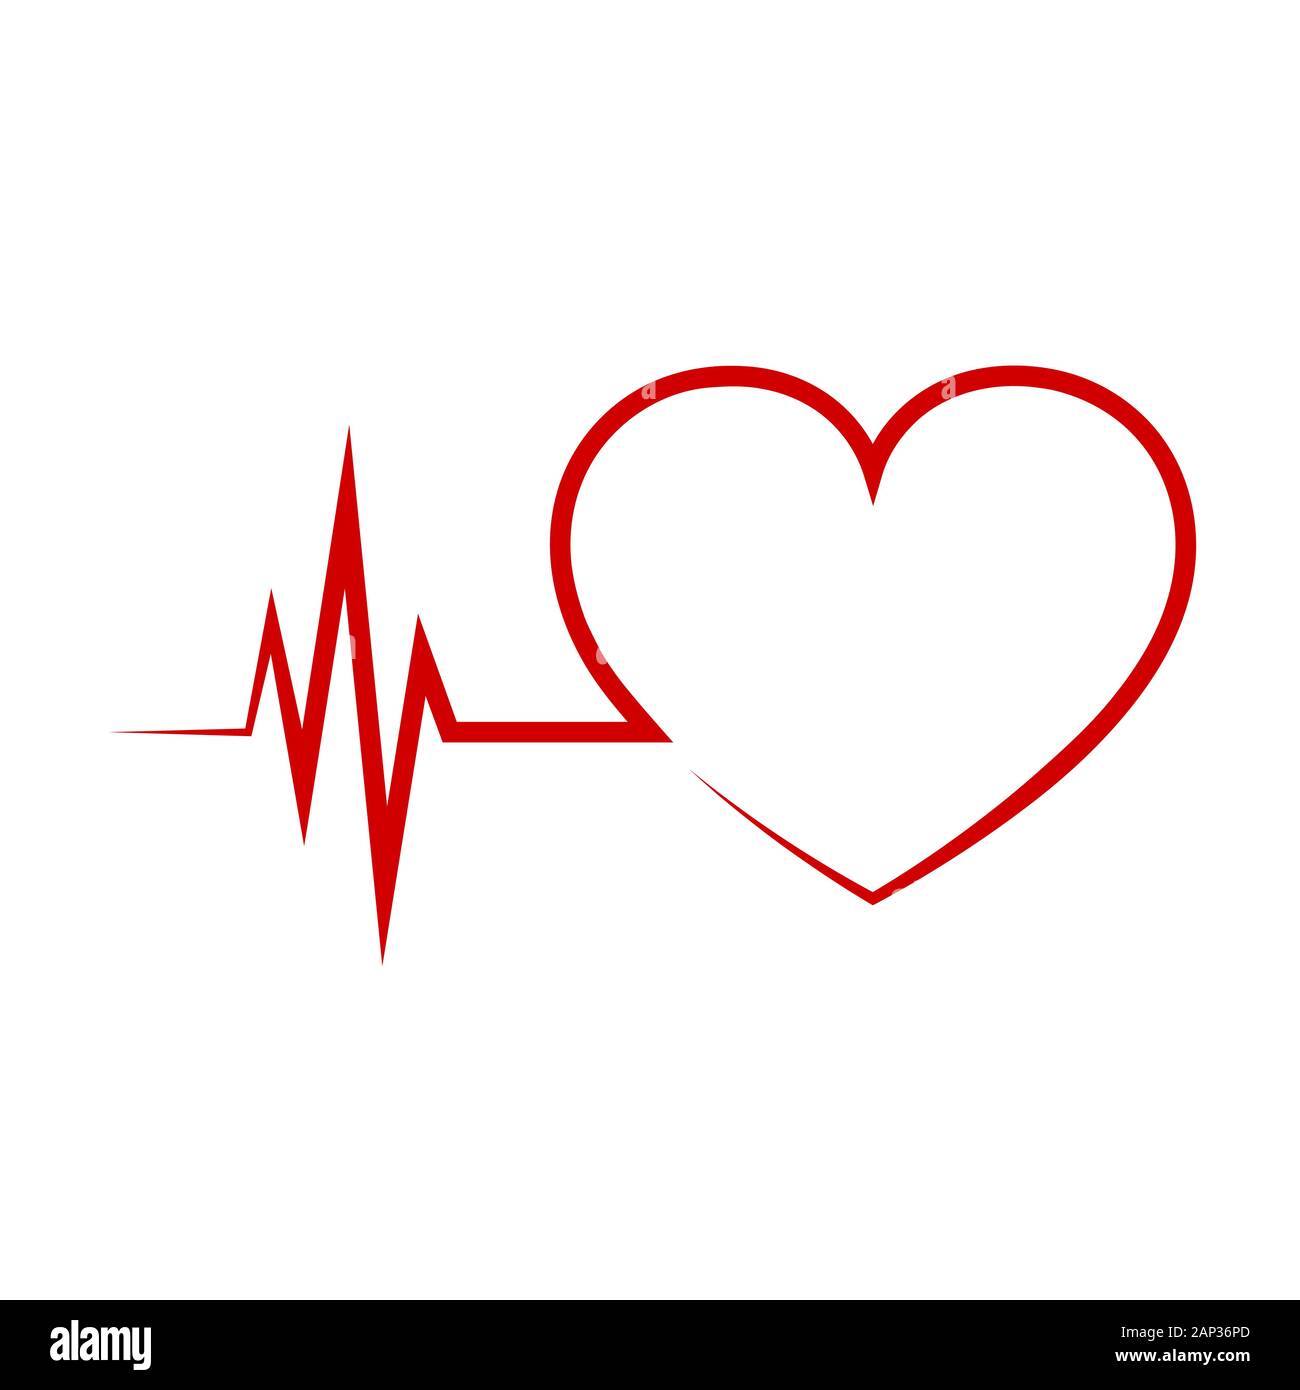 Red heart icon with sign heartbeat. Vector illustration. Heart sign in flat design. Stock Vector